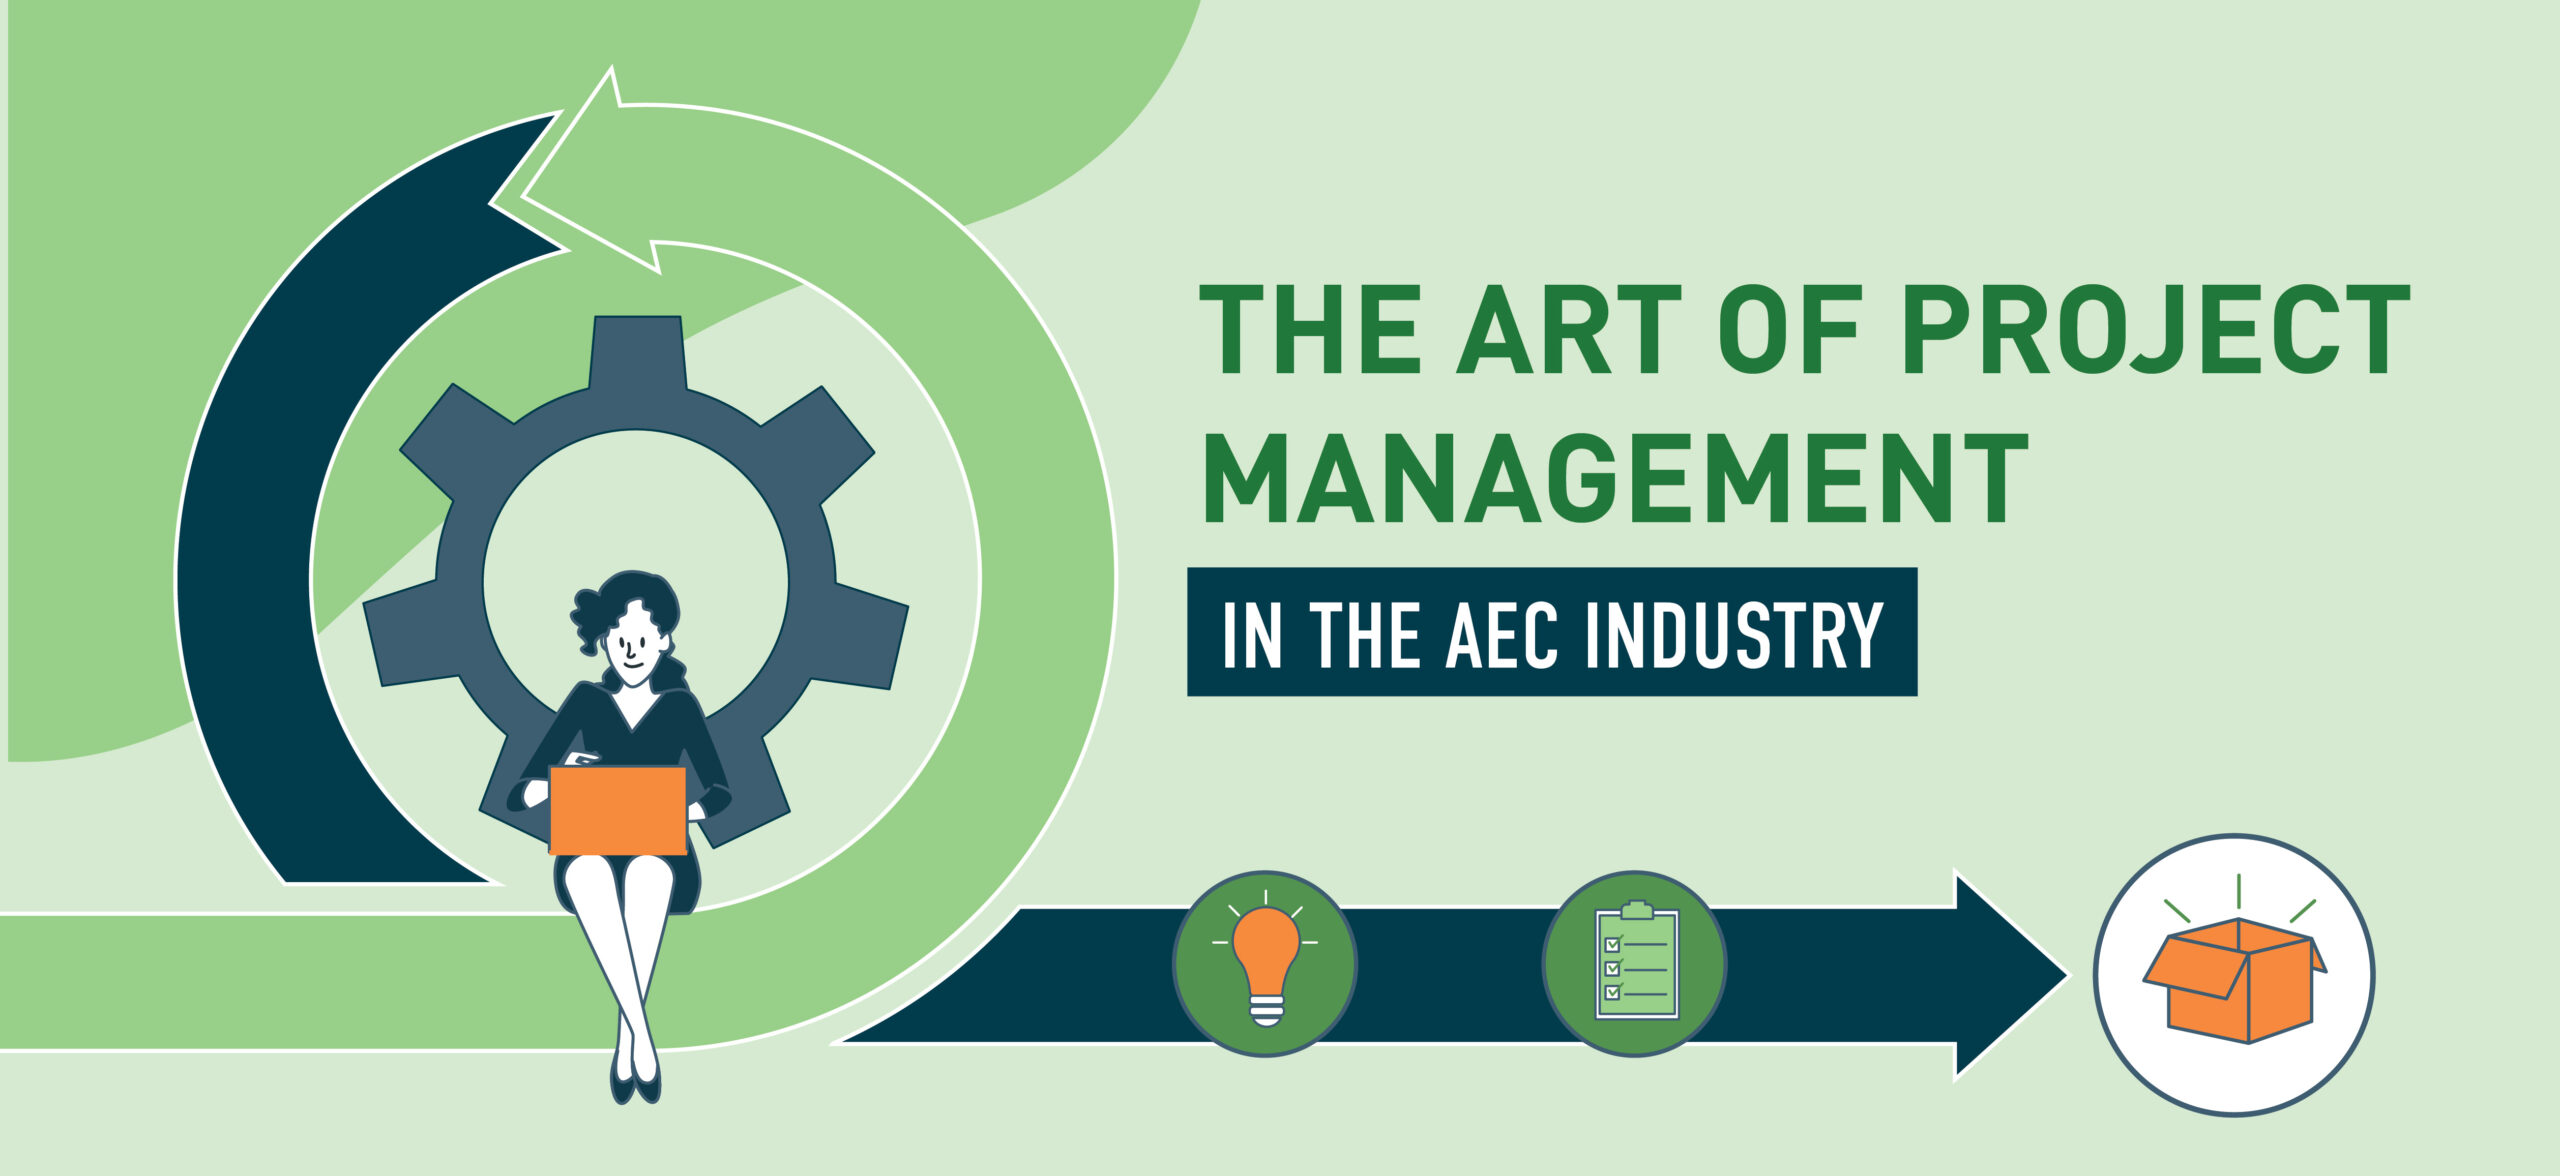 The Art of Project Management in the AEC Industry